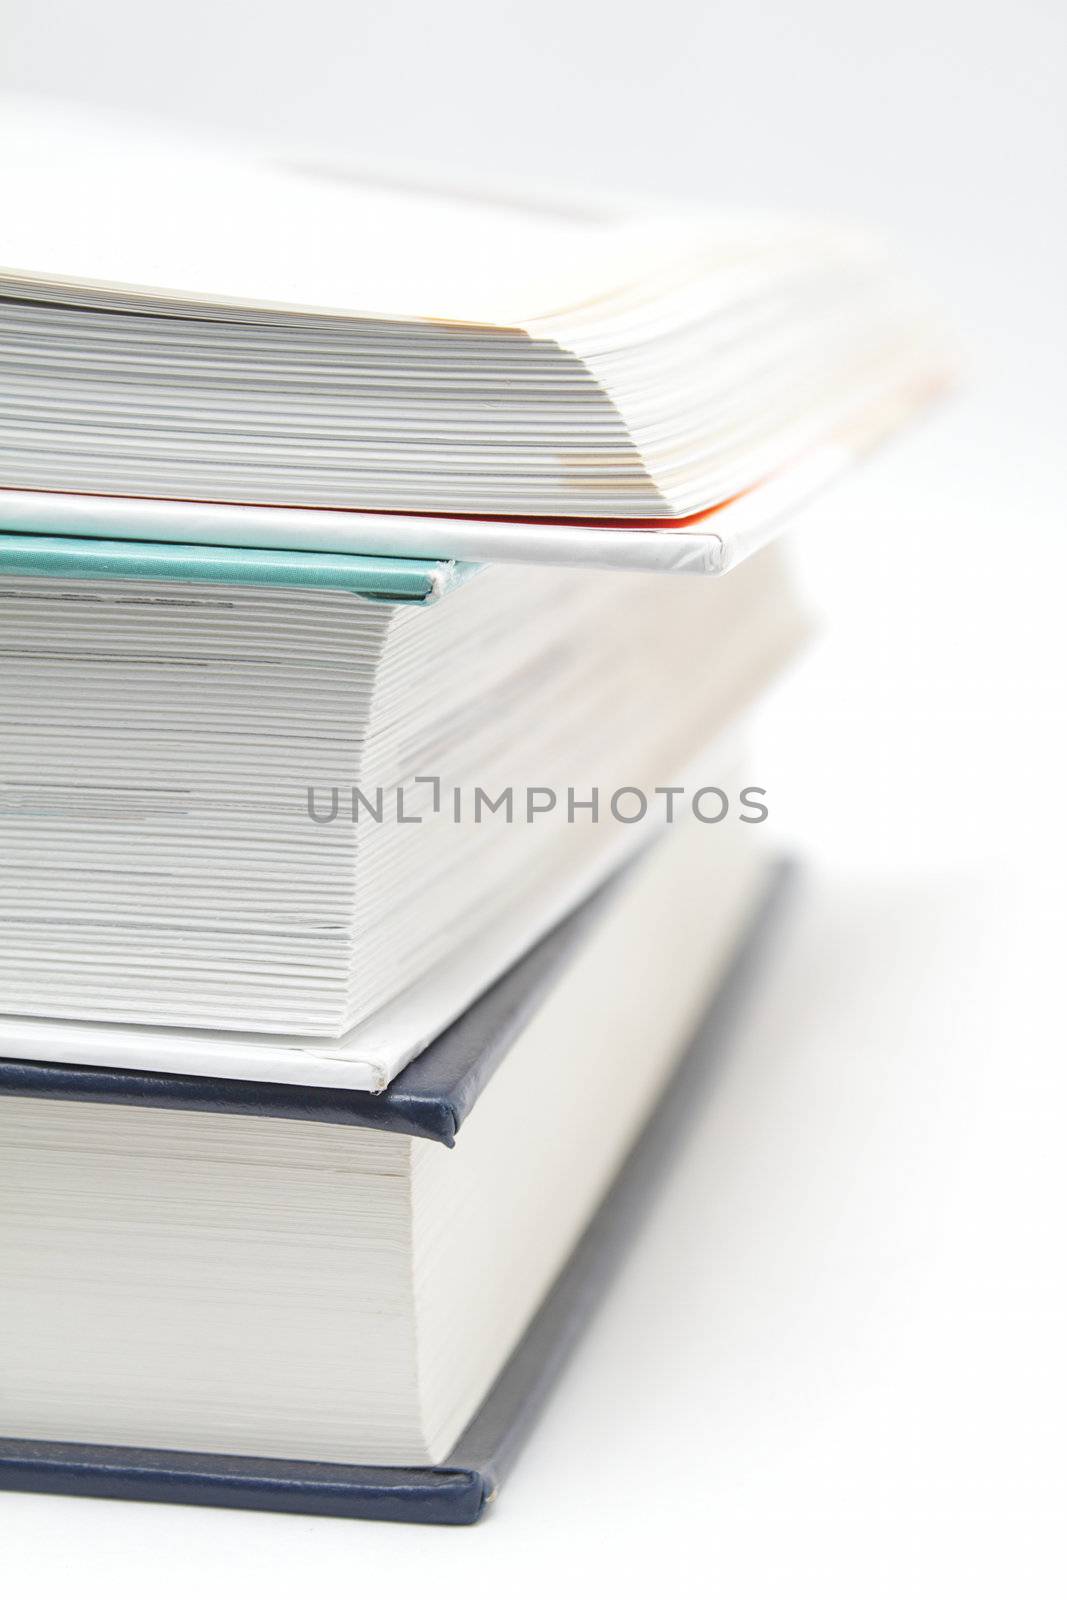 Stack of three books, upper is opened